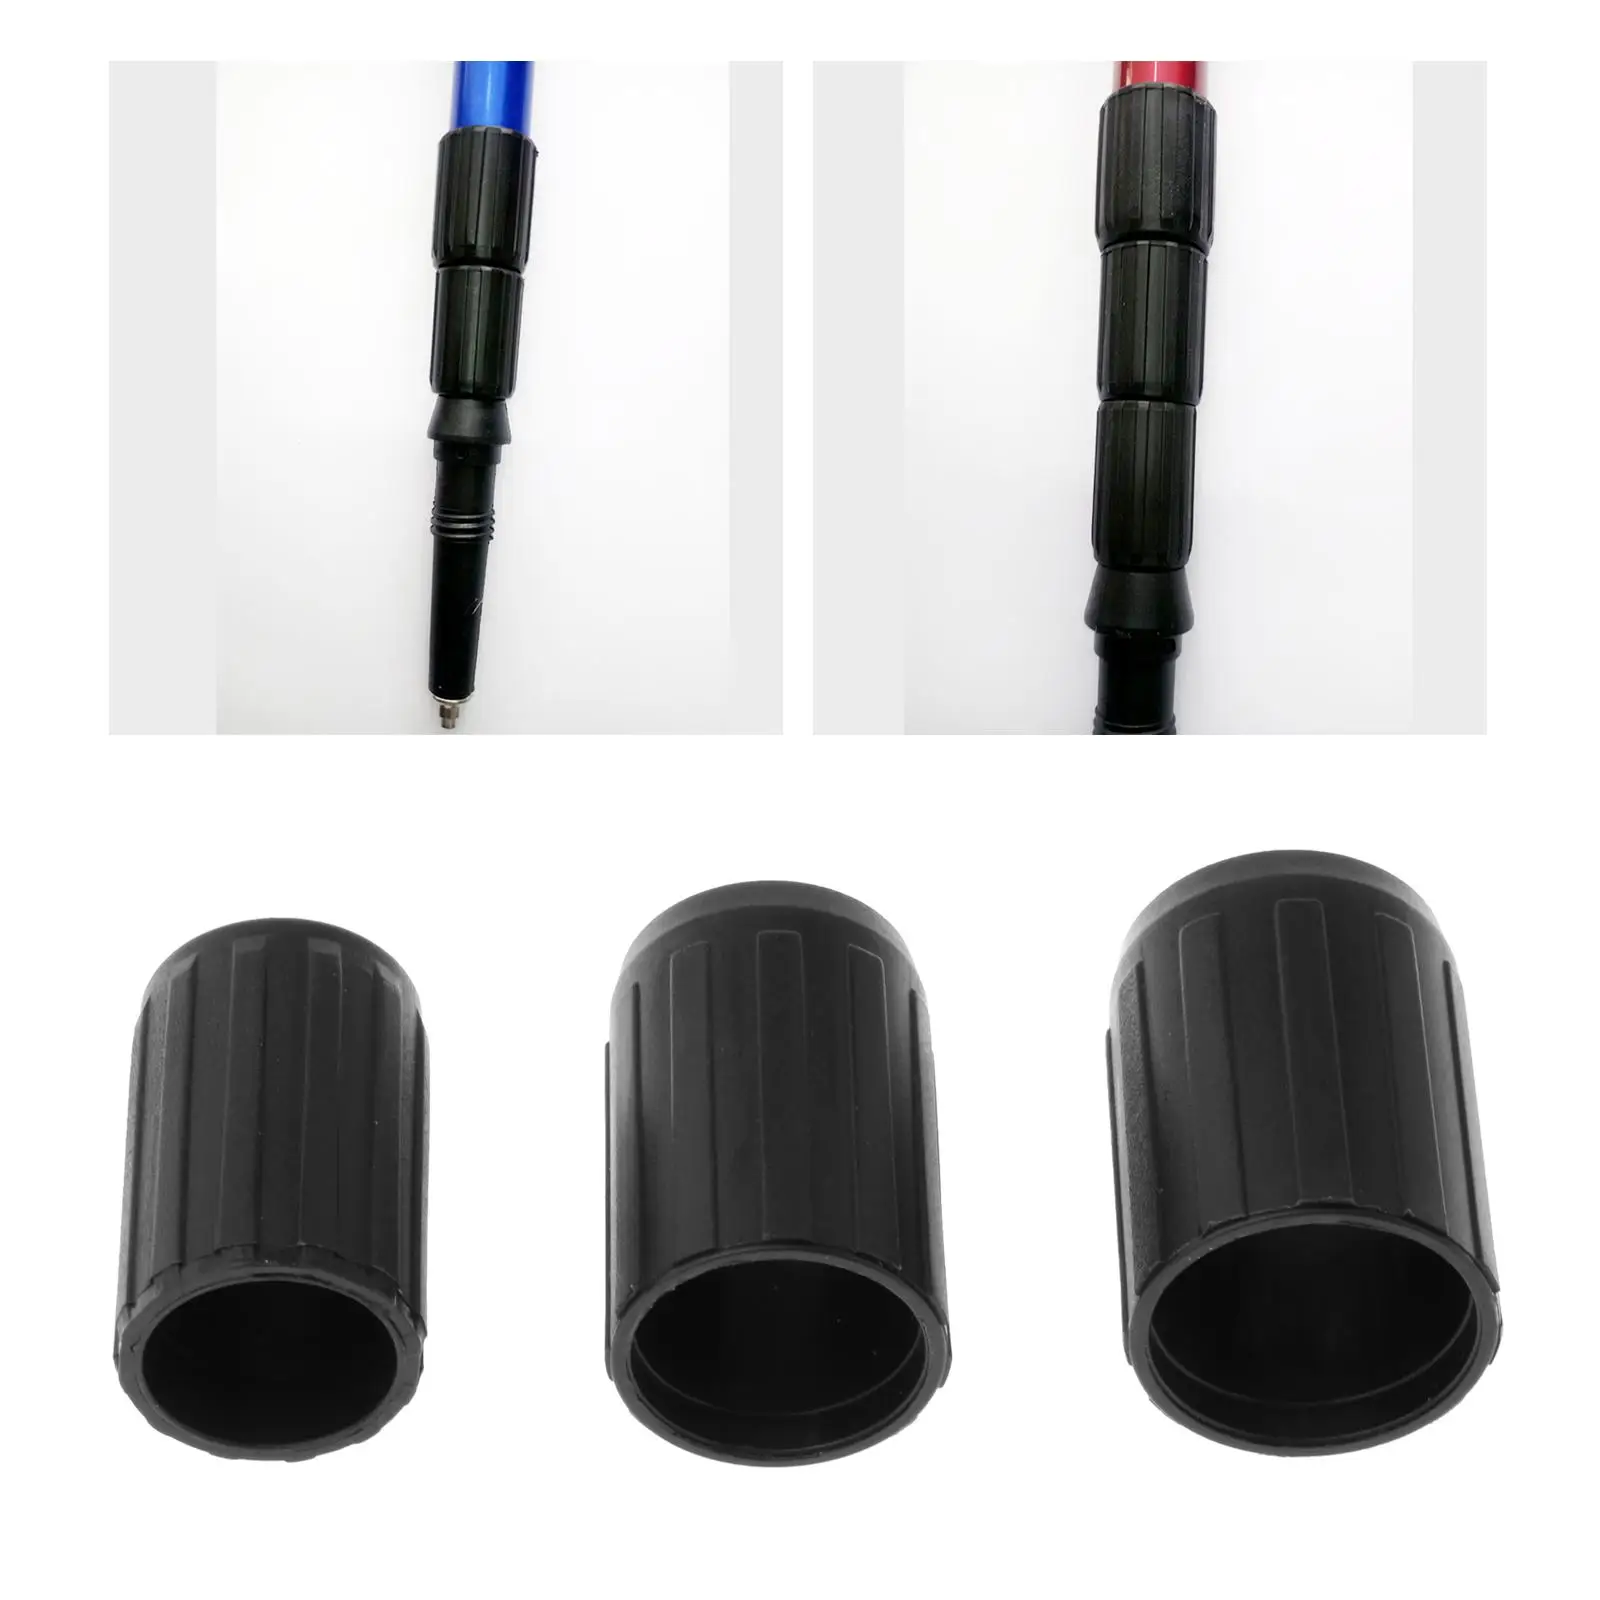 Trekking Pole Tip Mud Support Shock Absorbing Non Slip Replacement Protective Cover Rubber Feet for Walking Poles Equipment